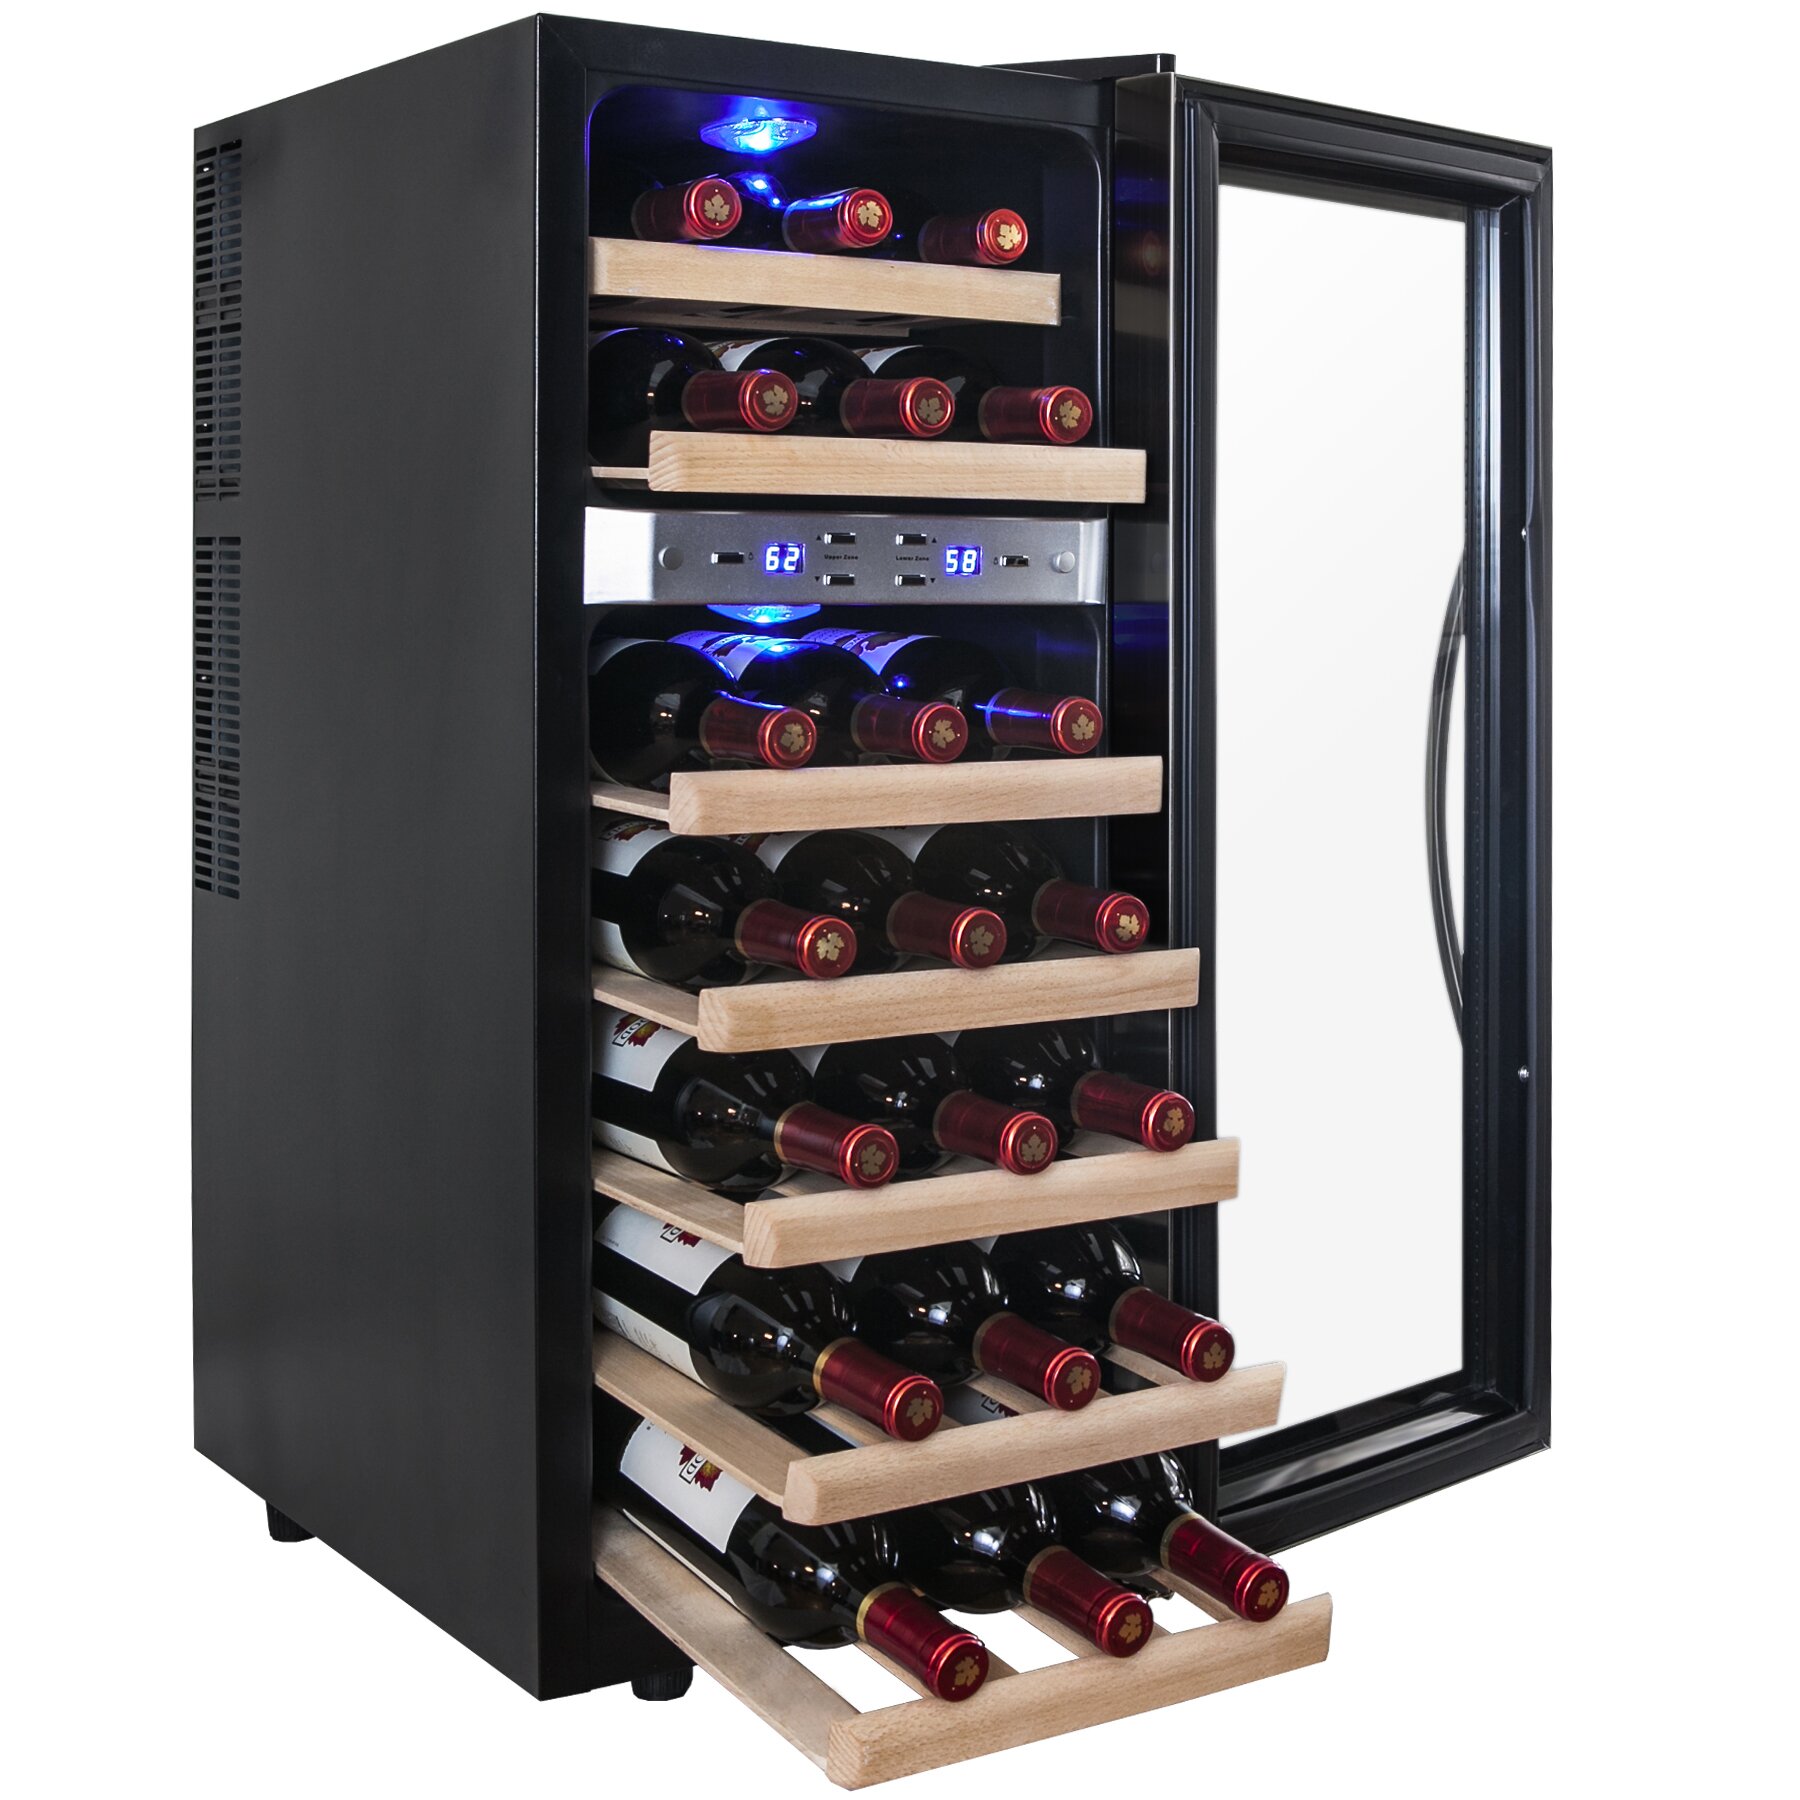 9 Reasons You Should Know to Buy a Wine Cooler?